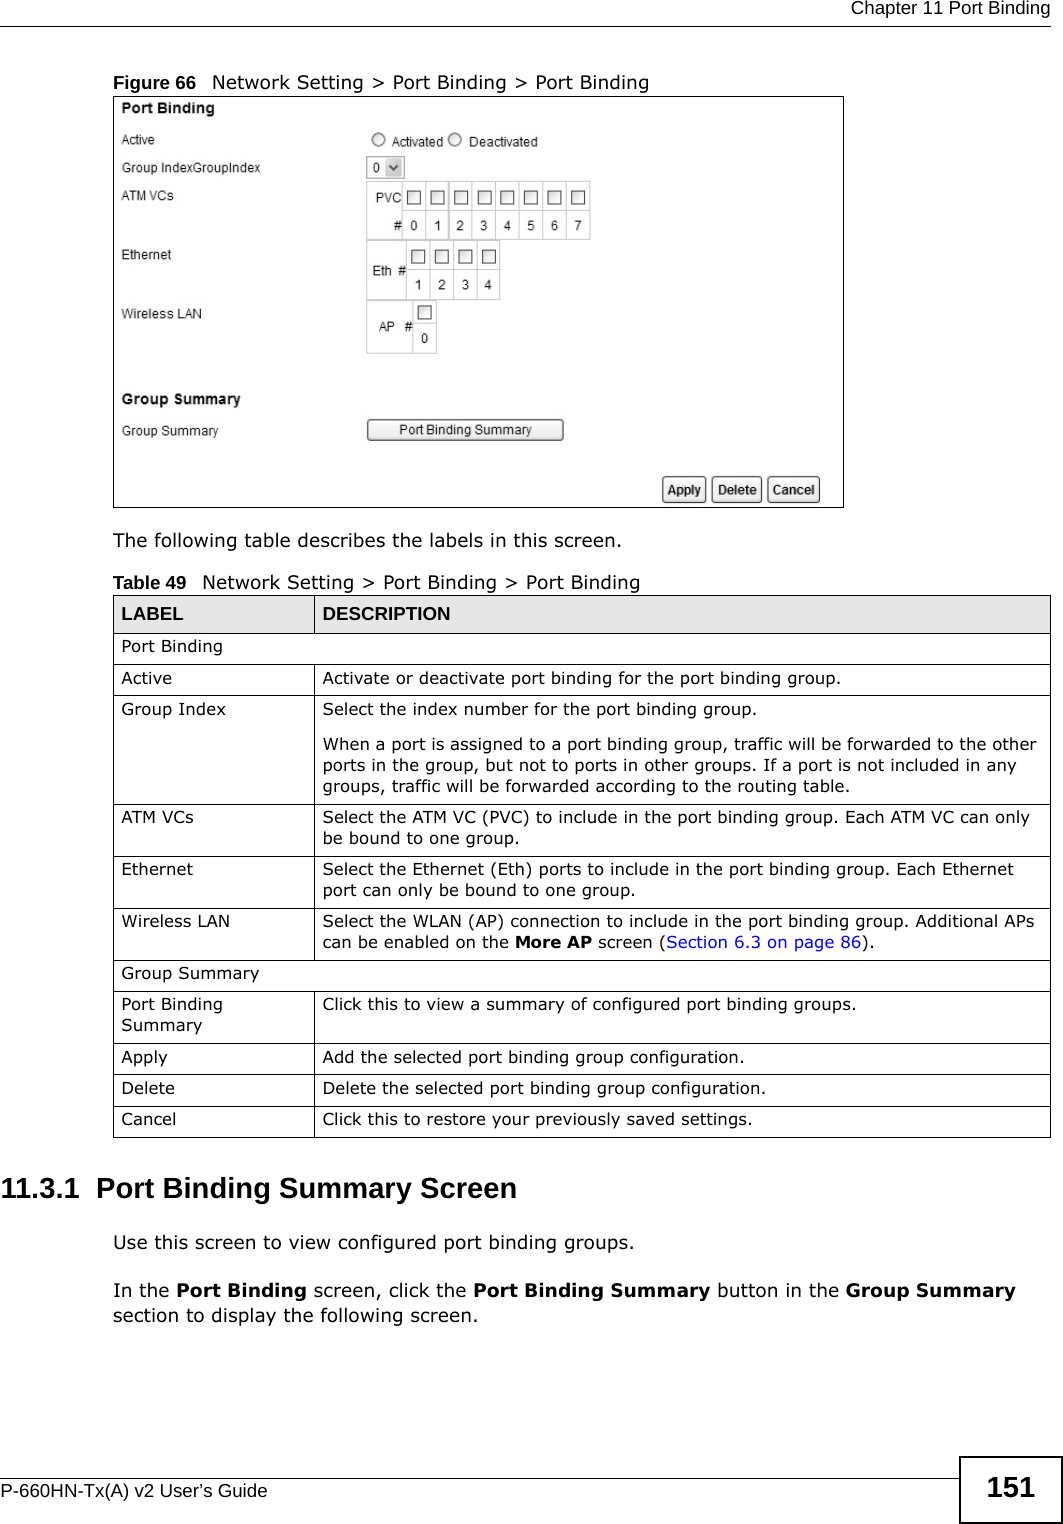  Chapter 11 Port BindingP-660HN-Tx(A) v2 User’s Guide 151Figure 66   Network Setting &gt; Port Binding &gt; Port BindingThe following table describes the labels in this screen. 11.3.1  Port Binding Summary ScreenUse this screen to view configured port binding groups.In the Port Binding screen, click the Port Binding Summary button in the Group Summary section to display the following screen.Table 49   Network Setting &gt; Port Binding &gt; Port BindingLABEL DESCRIPTIONPort BindingActive Activate or deactivate port binding for the port binding group.Group Index Select the index number for the port binding group. When a port is assigned to a port binding group, traffic will be forwarded to the other ports in the group, but not to ports in other groups. If a port is not included in any groups, traffic will be forwarded according to the routing table.ATM VCs Select the ATM VC (PVC) to include in the port binding group. Each ATM VC can only be bound to one group.Ethernet Select the Ethernet (Eth) ports to include in the port binding group. Each Ethernet port can only be bound to one group.Wireless LAN Select the WLAN (AP) connection to include in the port binding group. Additional APs can be enabled on the More AP screen (Section 6.3 on page 86).Group SummaryPort Binding SummaryClick this to view a summary of configured port binding groups.Apply Add the selected port binding group configuration.Delete Delete the selected port binding group configuration. Cancel Click this to restore your previously saved settings.